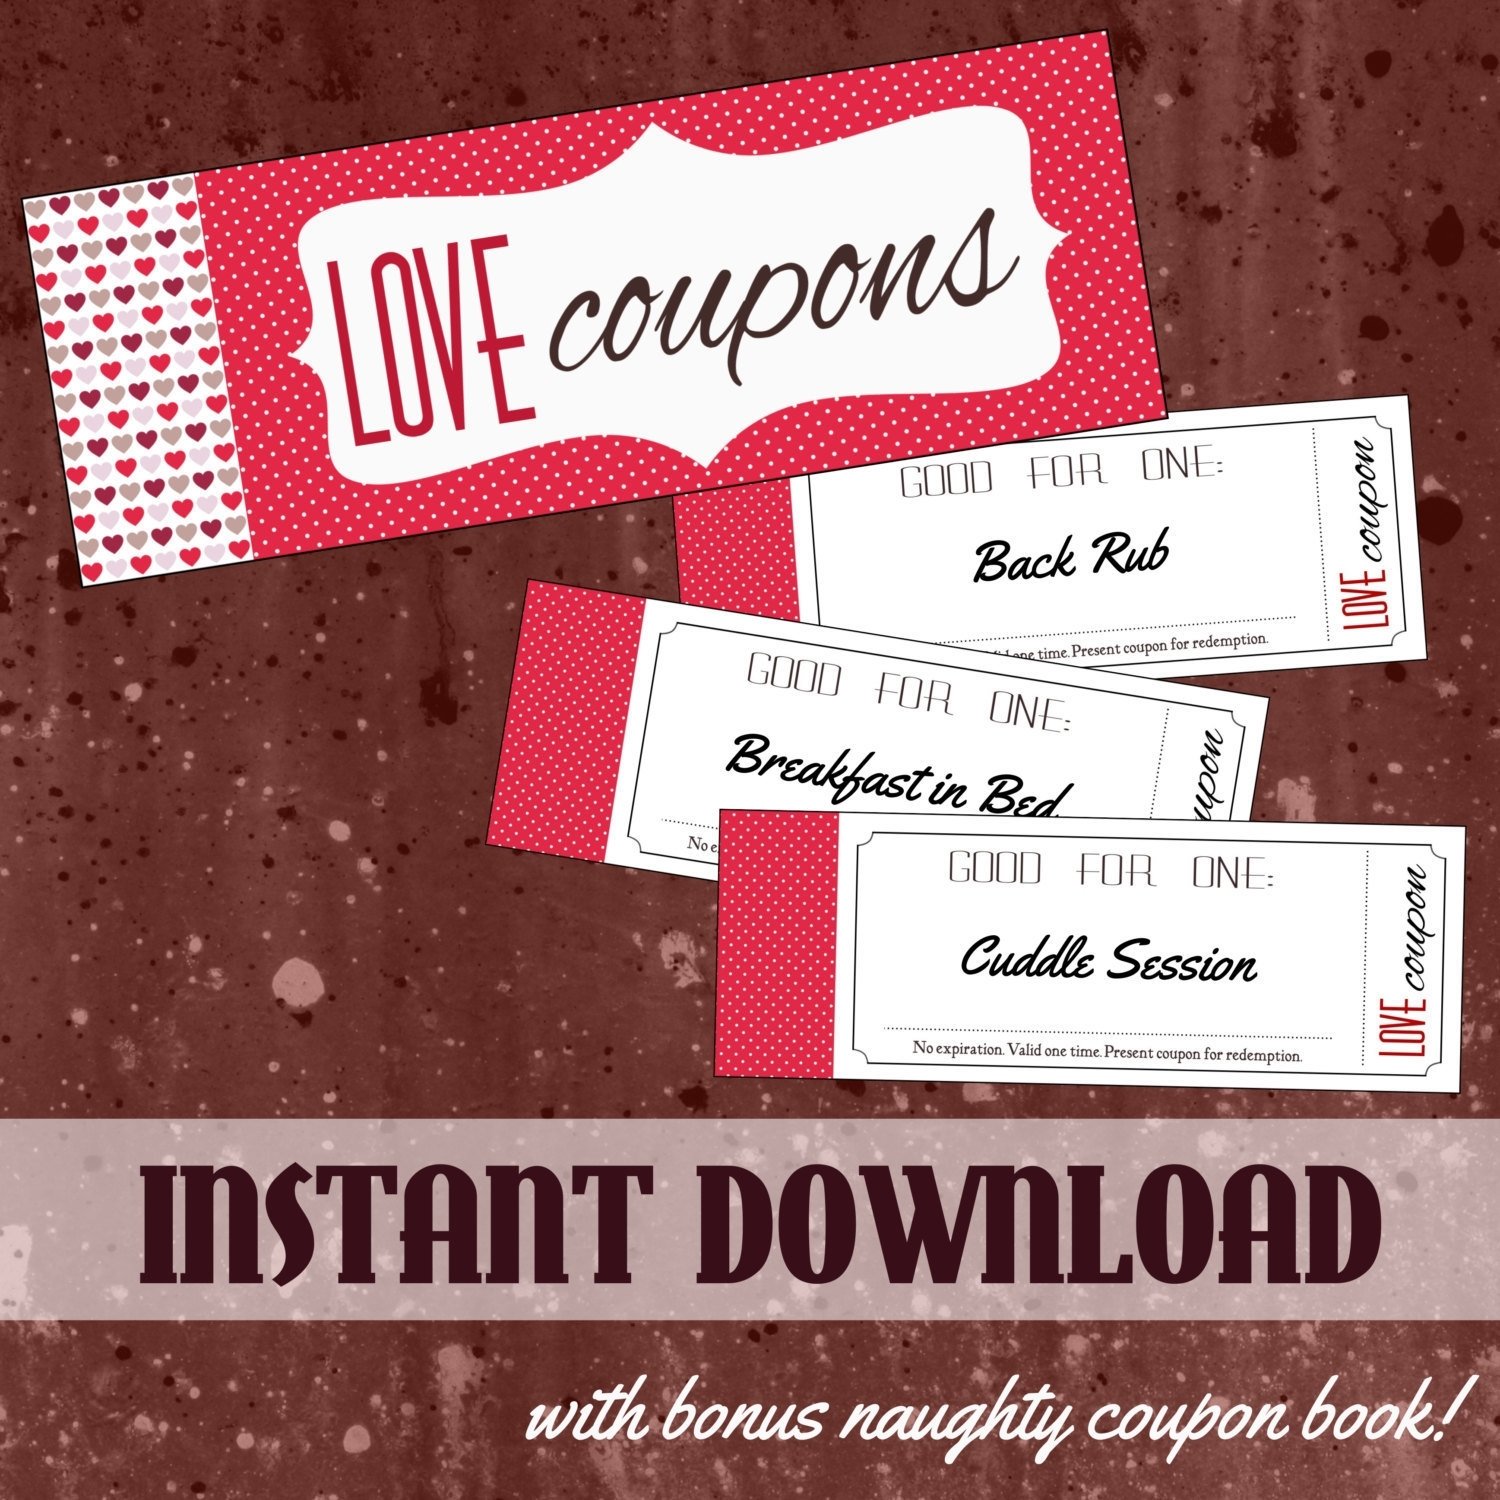 10 Great Coupon Book Ideas For Boyfriend printable love coupon book for him or for her with bonus naughty 2022